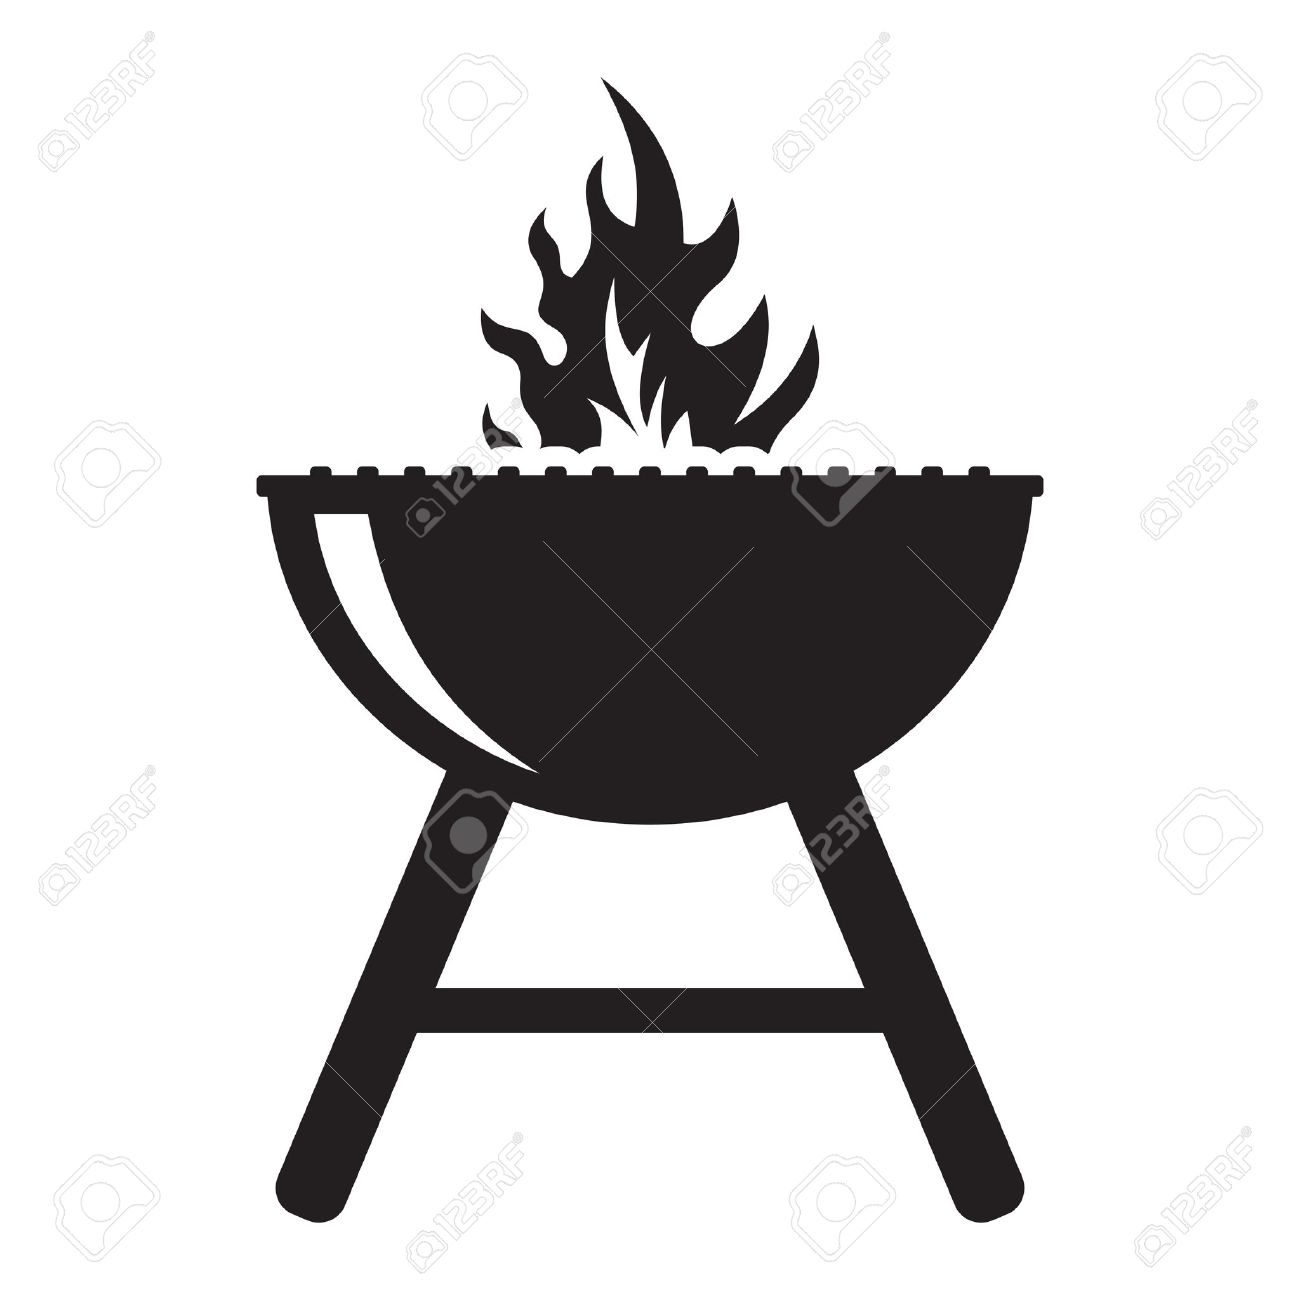 Black clipart bbq. Silhouette at getdrawings com